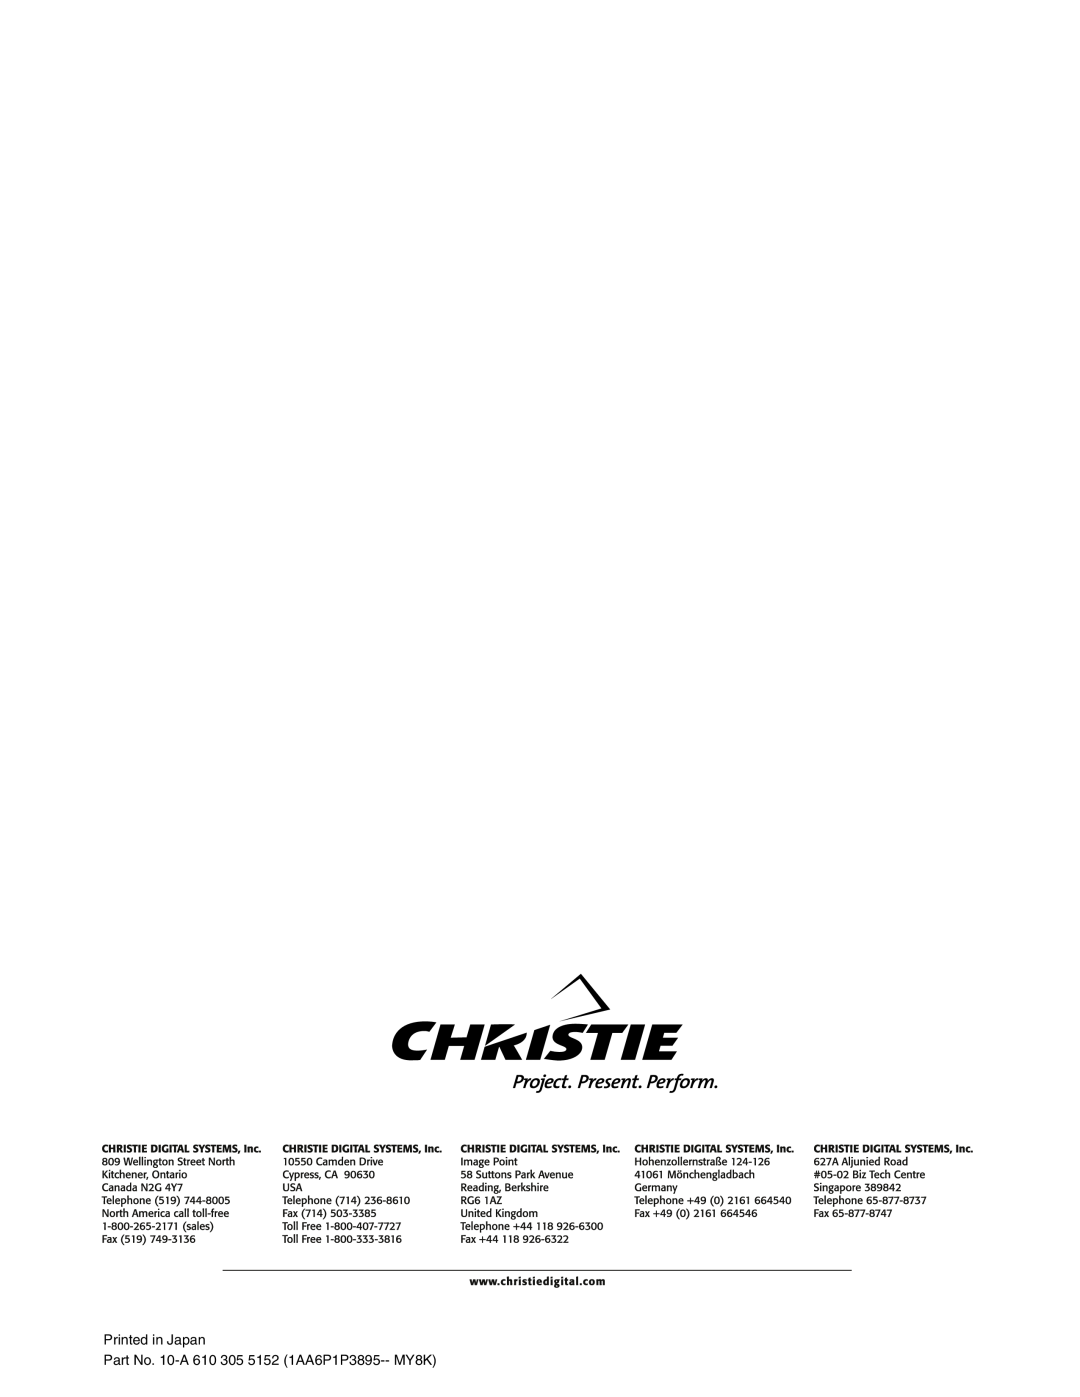 Christie Digital Systems 38-VIV302-01 user manual Printed in Japan Part No. 10-A 610 305 5152 1AA6P1P3895-- MY8K 